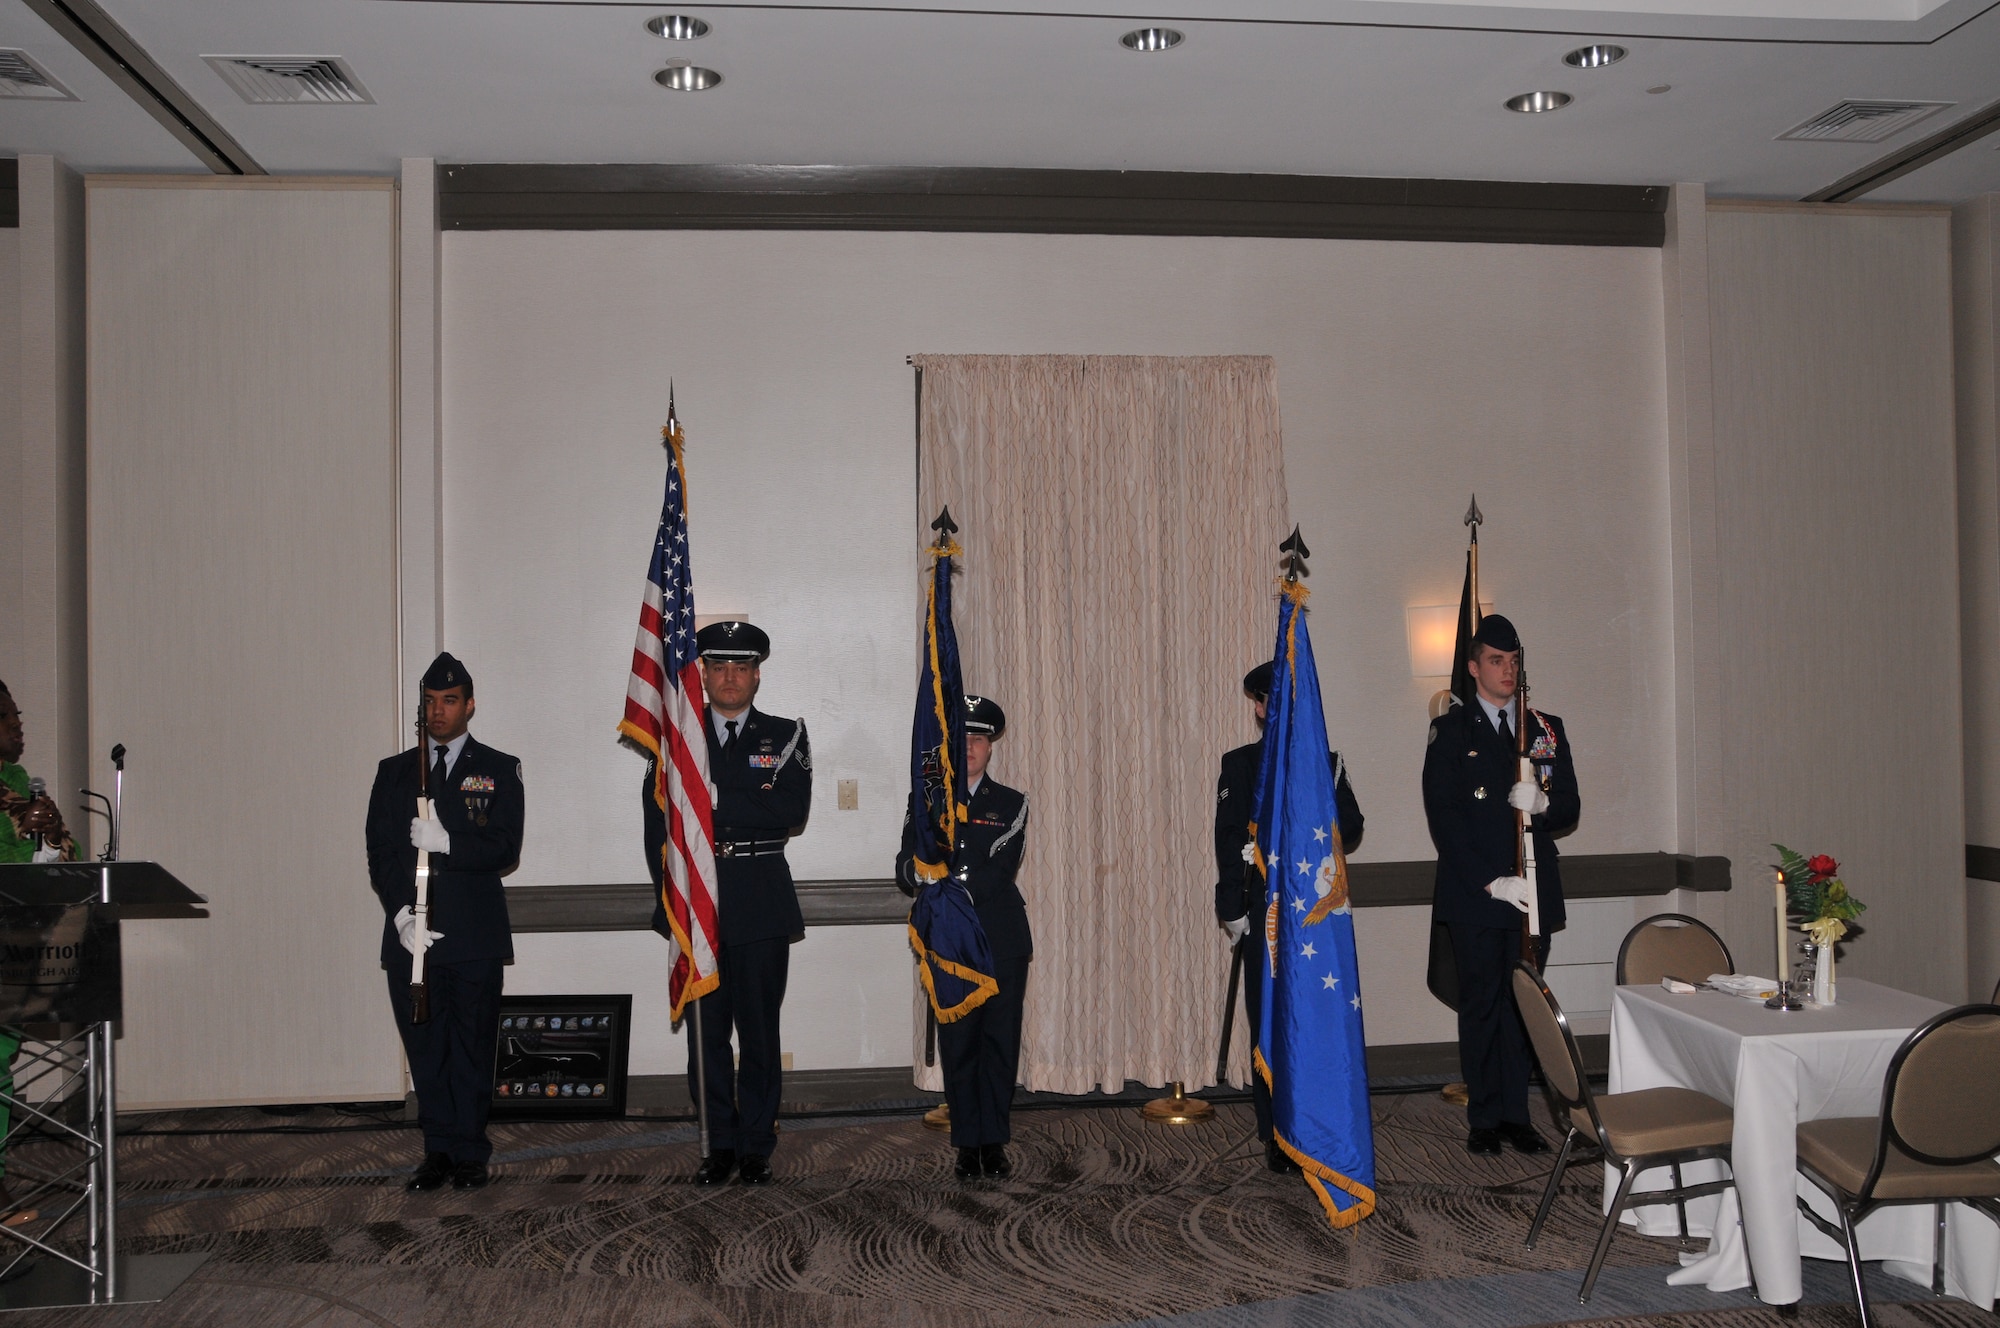 Members of the 171st Air Refueling Wing Base Honor Guard post the colors as the beginning ceremony of its 32nd annual African-American Heritage Luncheon, Friday, Feb. 27, 2015, at the Pittsburgh Airport Marriott in Coraopolis, Pa. The event allowed the 171st ARW to celebrate "A Century of Black Life, History, and Culture" with the local community during African-American History Month. (U.S. Air National Guard photo by Airman 1st Class Allyson L Manners/ Released)